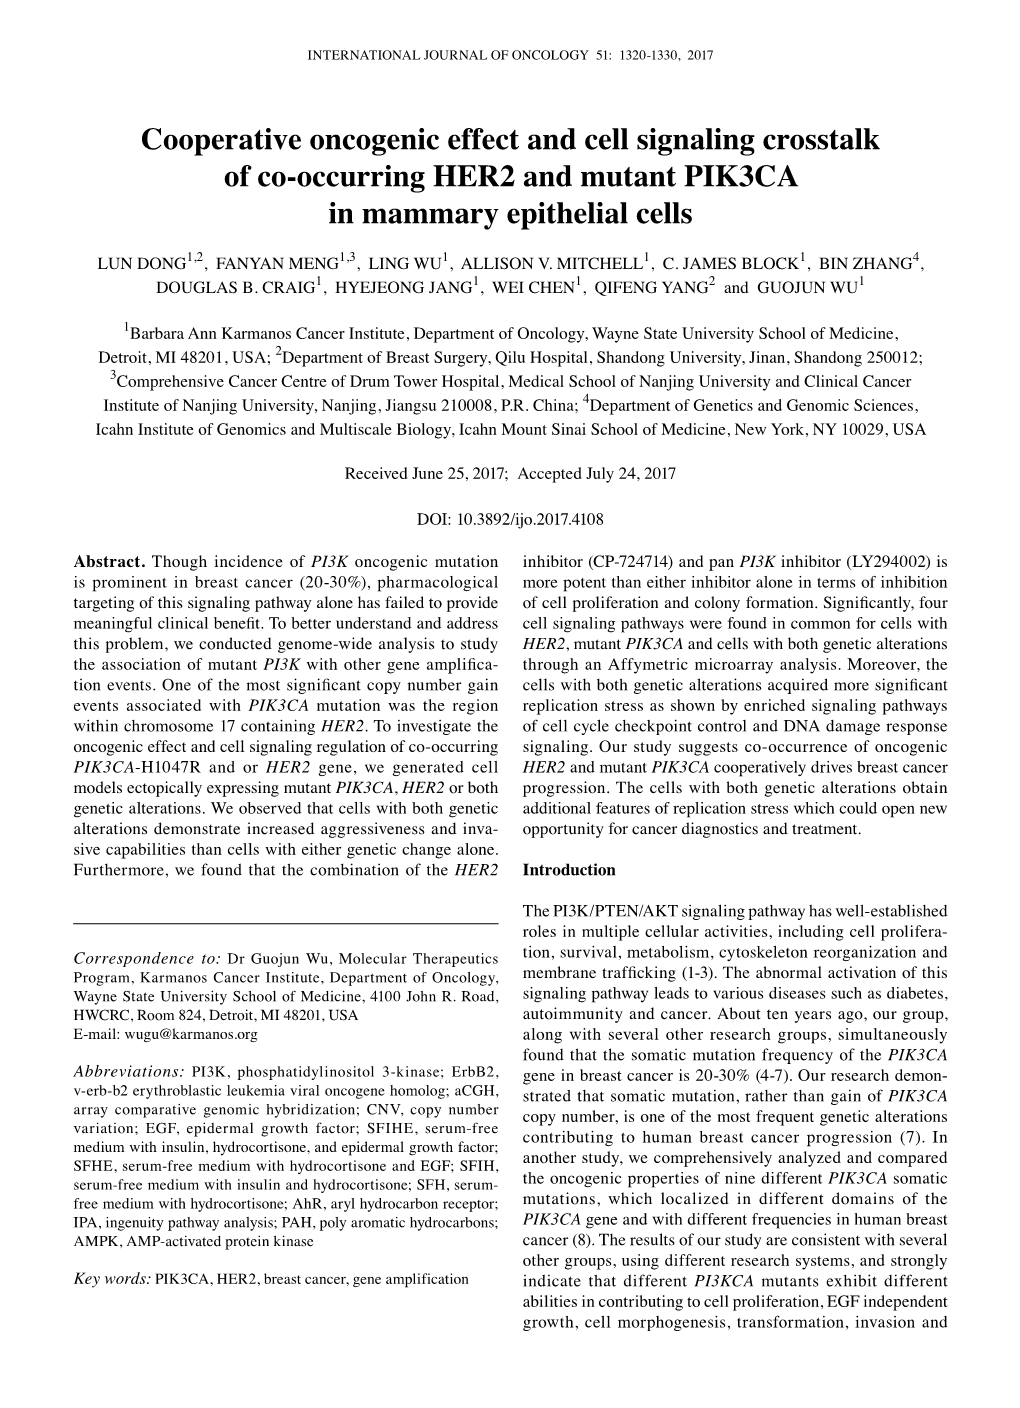 Cooperative Oncogenic Effect and Cell Signaling Crosstalk of Co‑Occurring HER2 and Mutant PIK3CA in Mammary Epithelial Cells